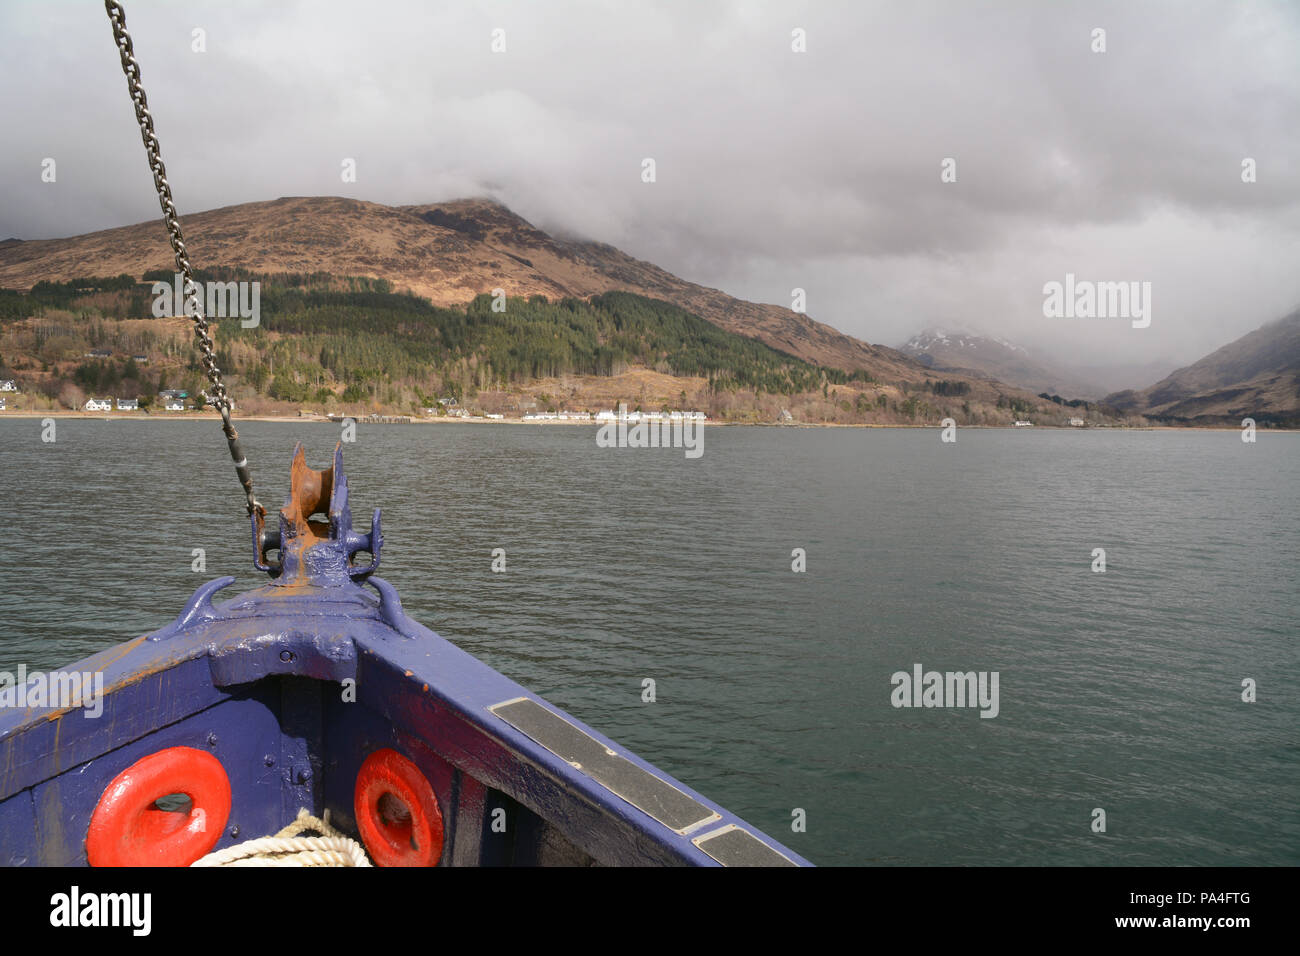 The bow of the ferry boat connecting the port town of Mallaig with Inverie (in the distance) on the Knoydart Peninsula, Scotland, United Kingdom. Stock Photo